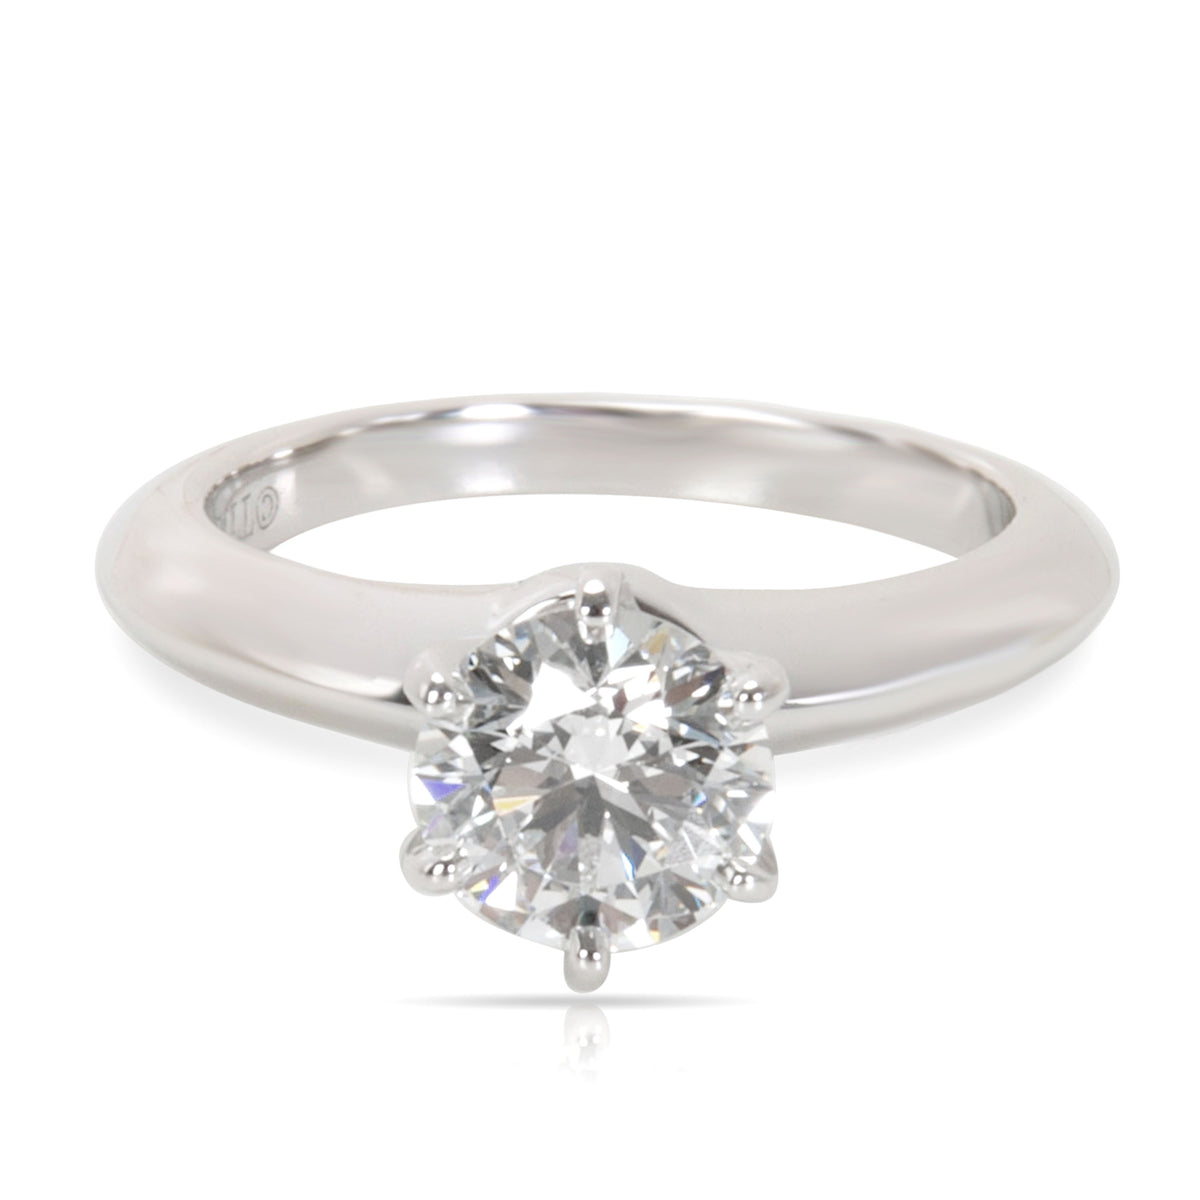 Tiffany & Co. Diamond Solitaire Engagement Ring in Platinum (0.93 ct F/VVS1)